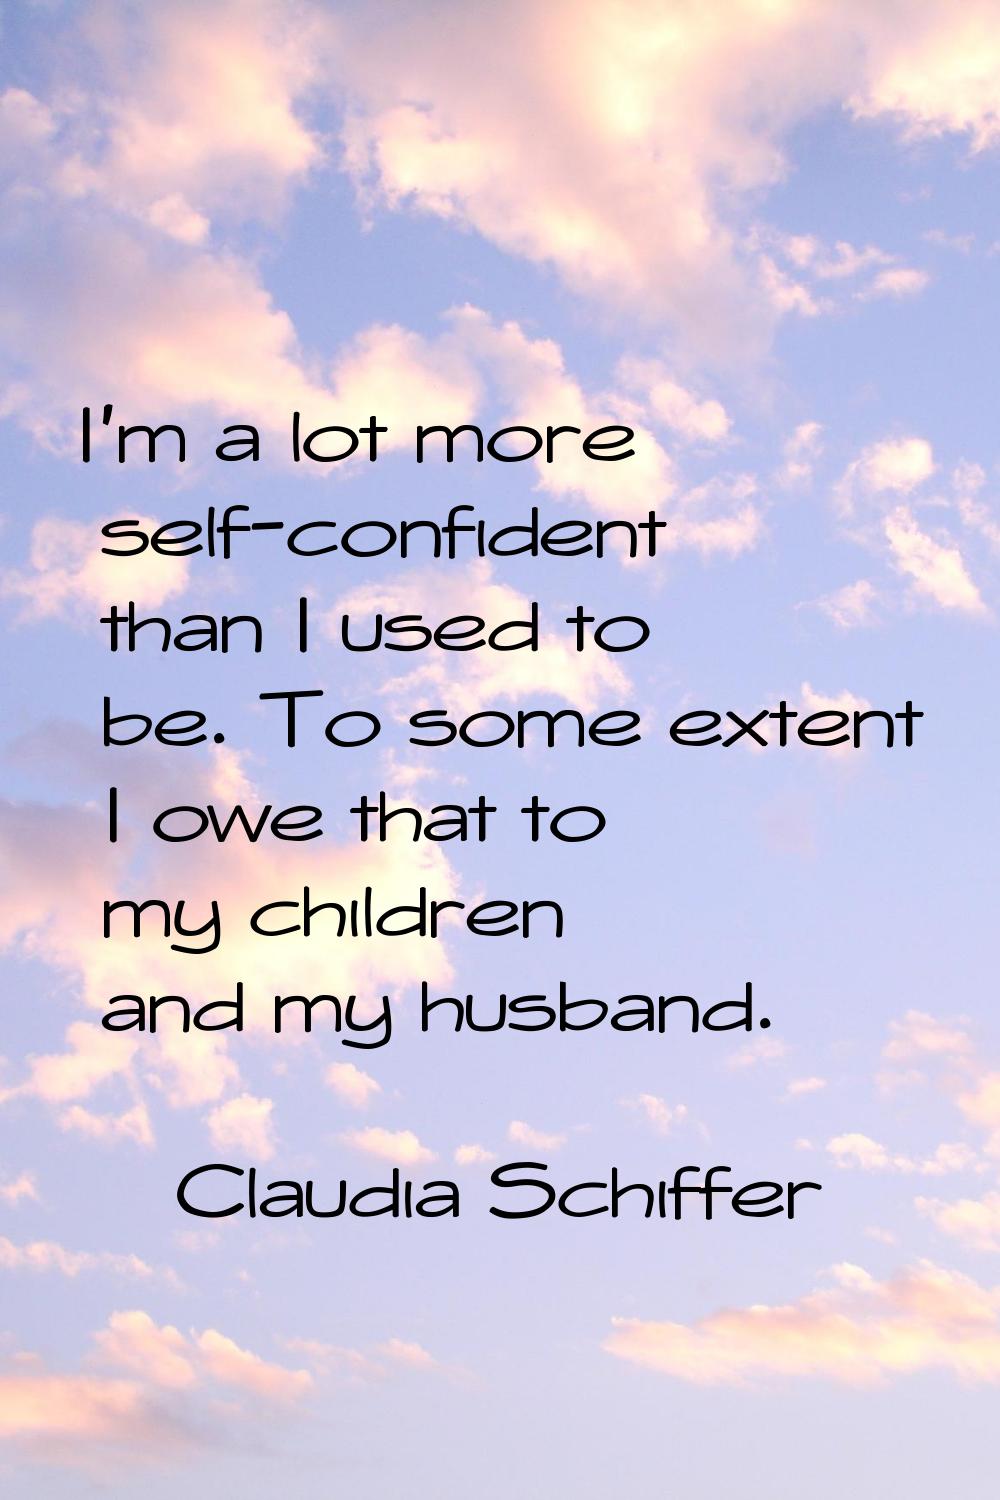 I'm a lot more self-confident than I used to be. To some extent I owe that to my children and my hu